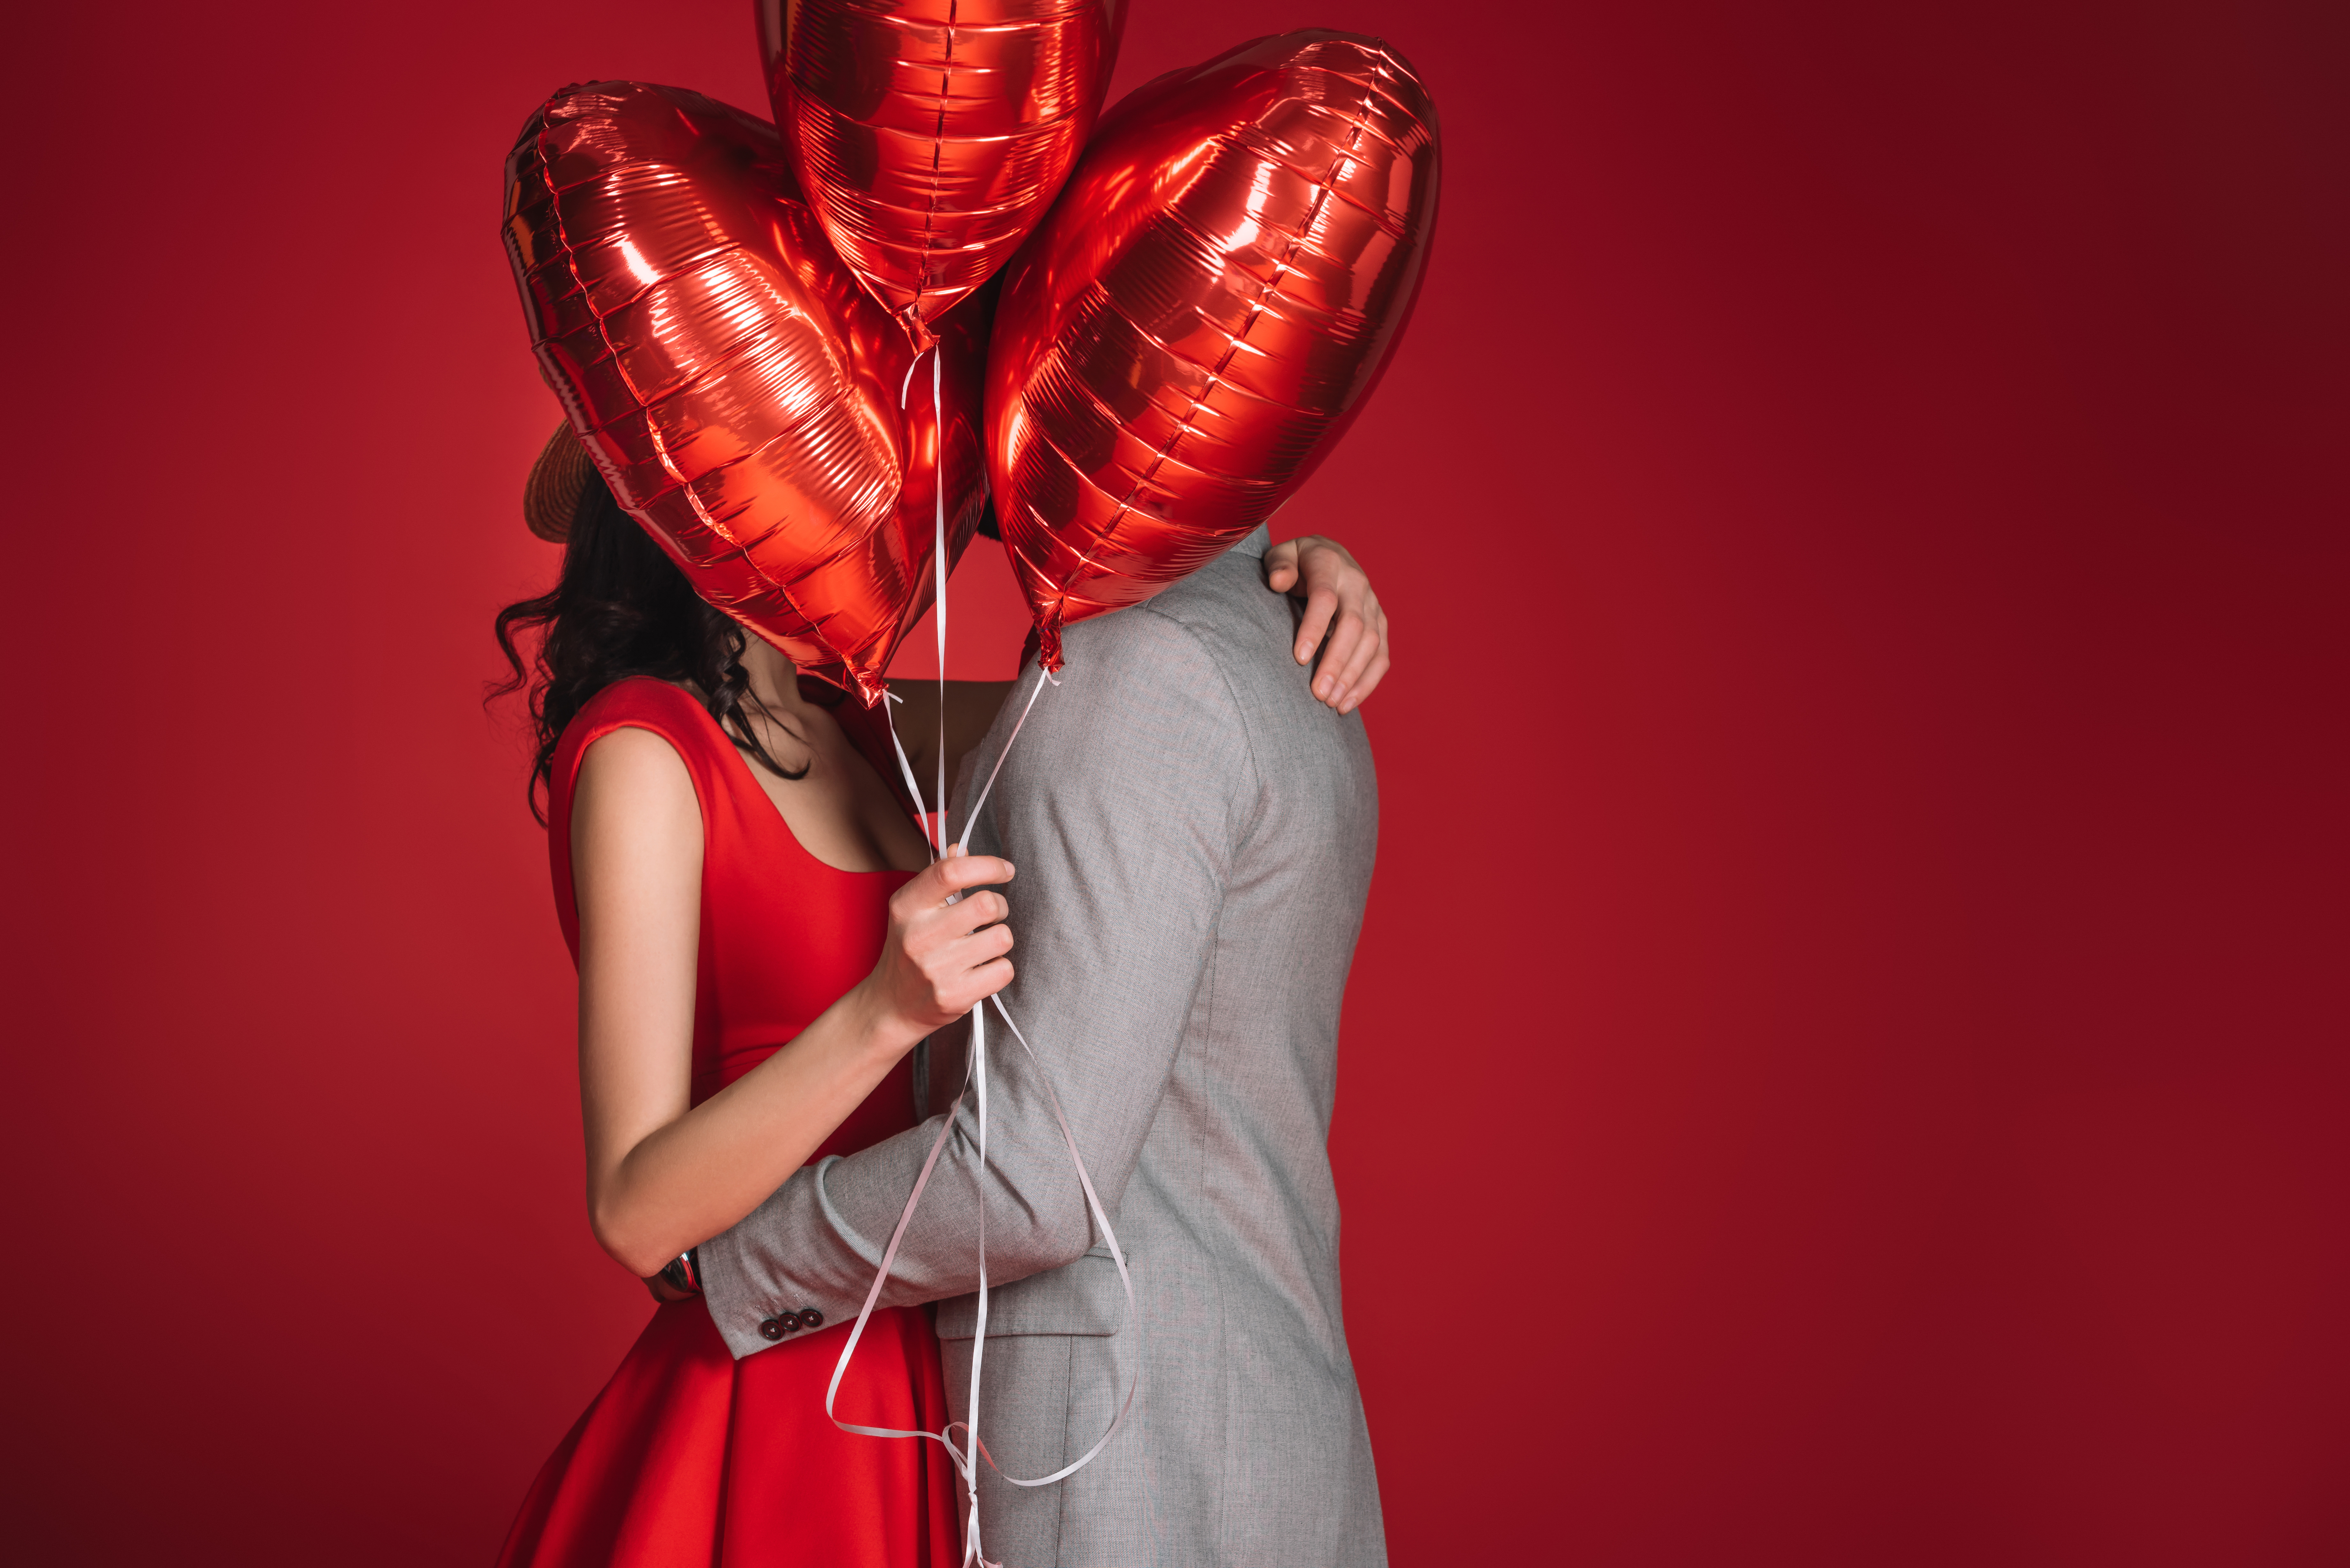 A couple covering their faces with some red balloons